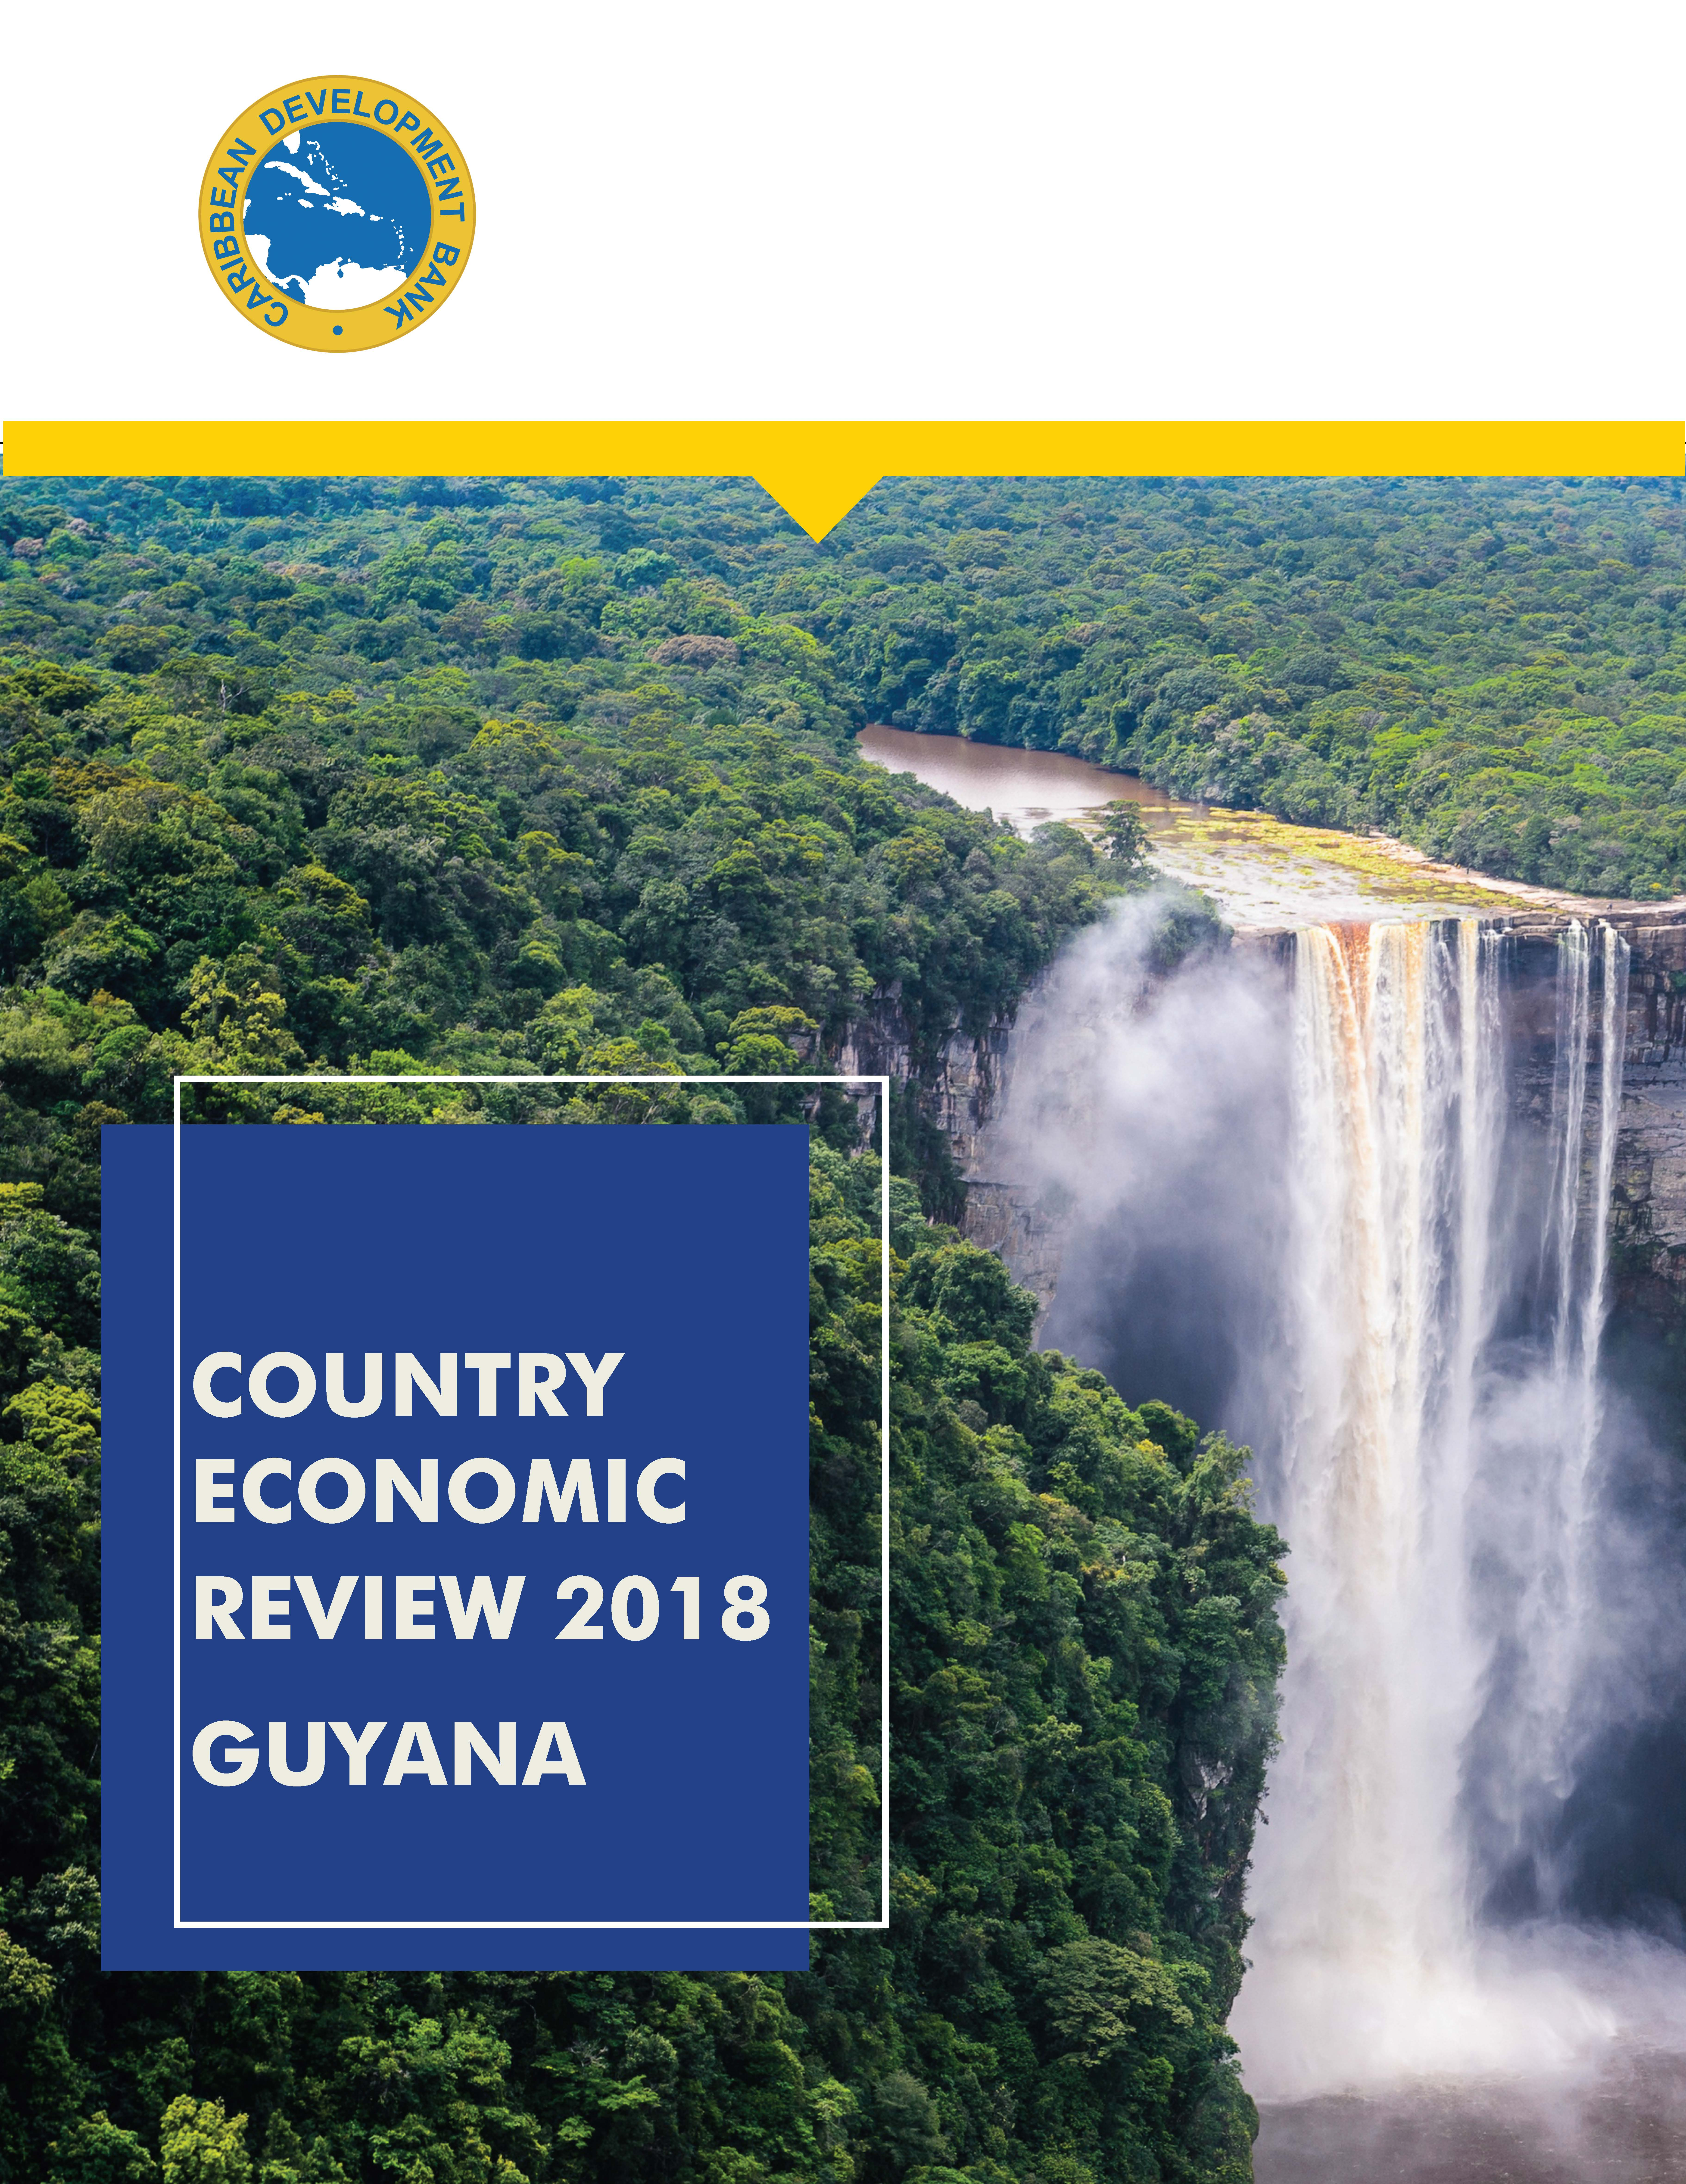 cover of 2018 Economic Review for Guyana showing Kaieteur Falls